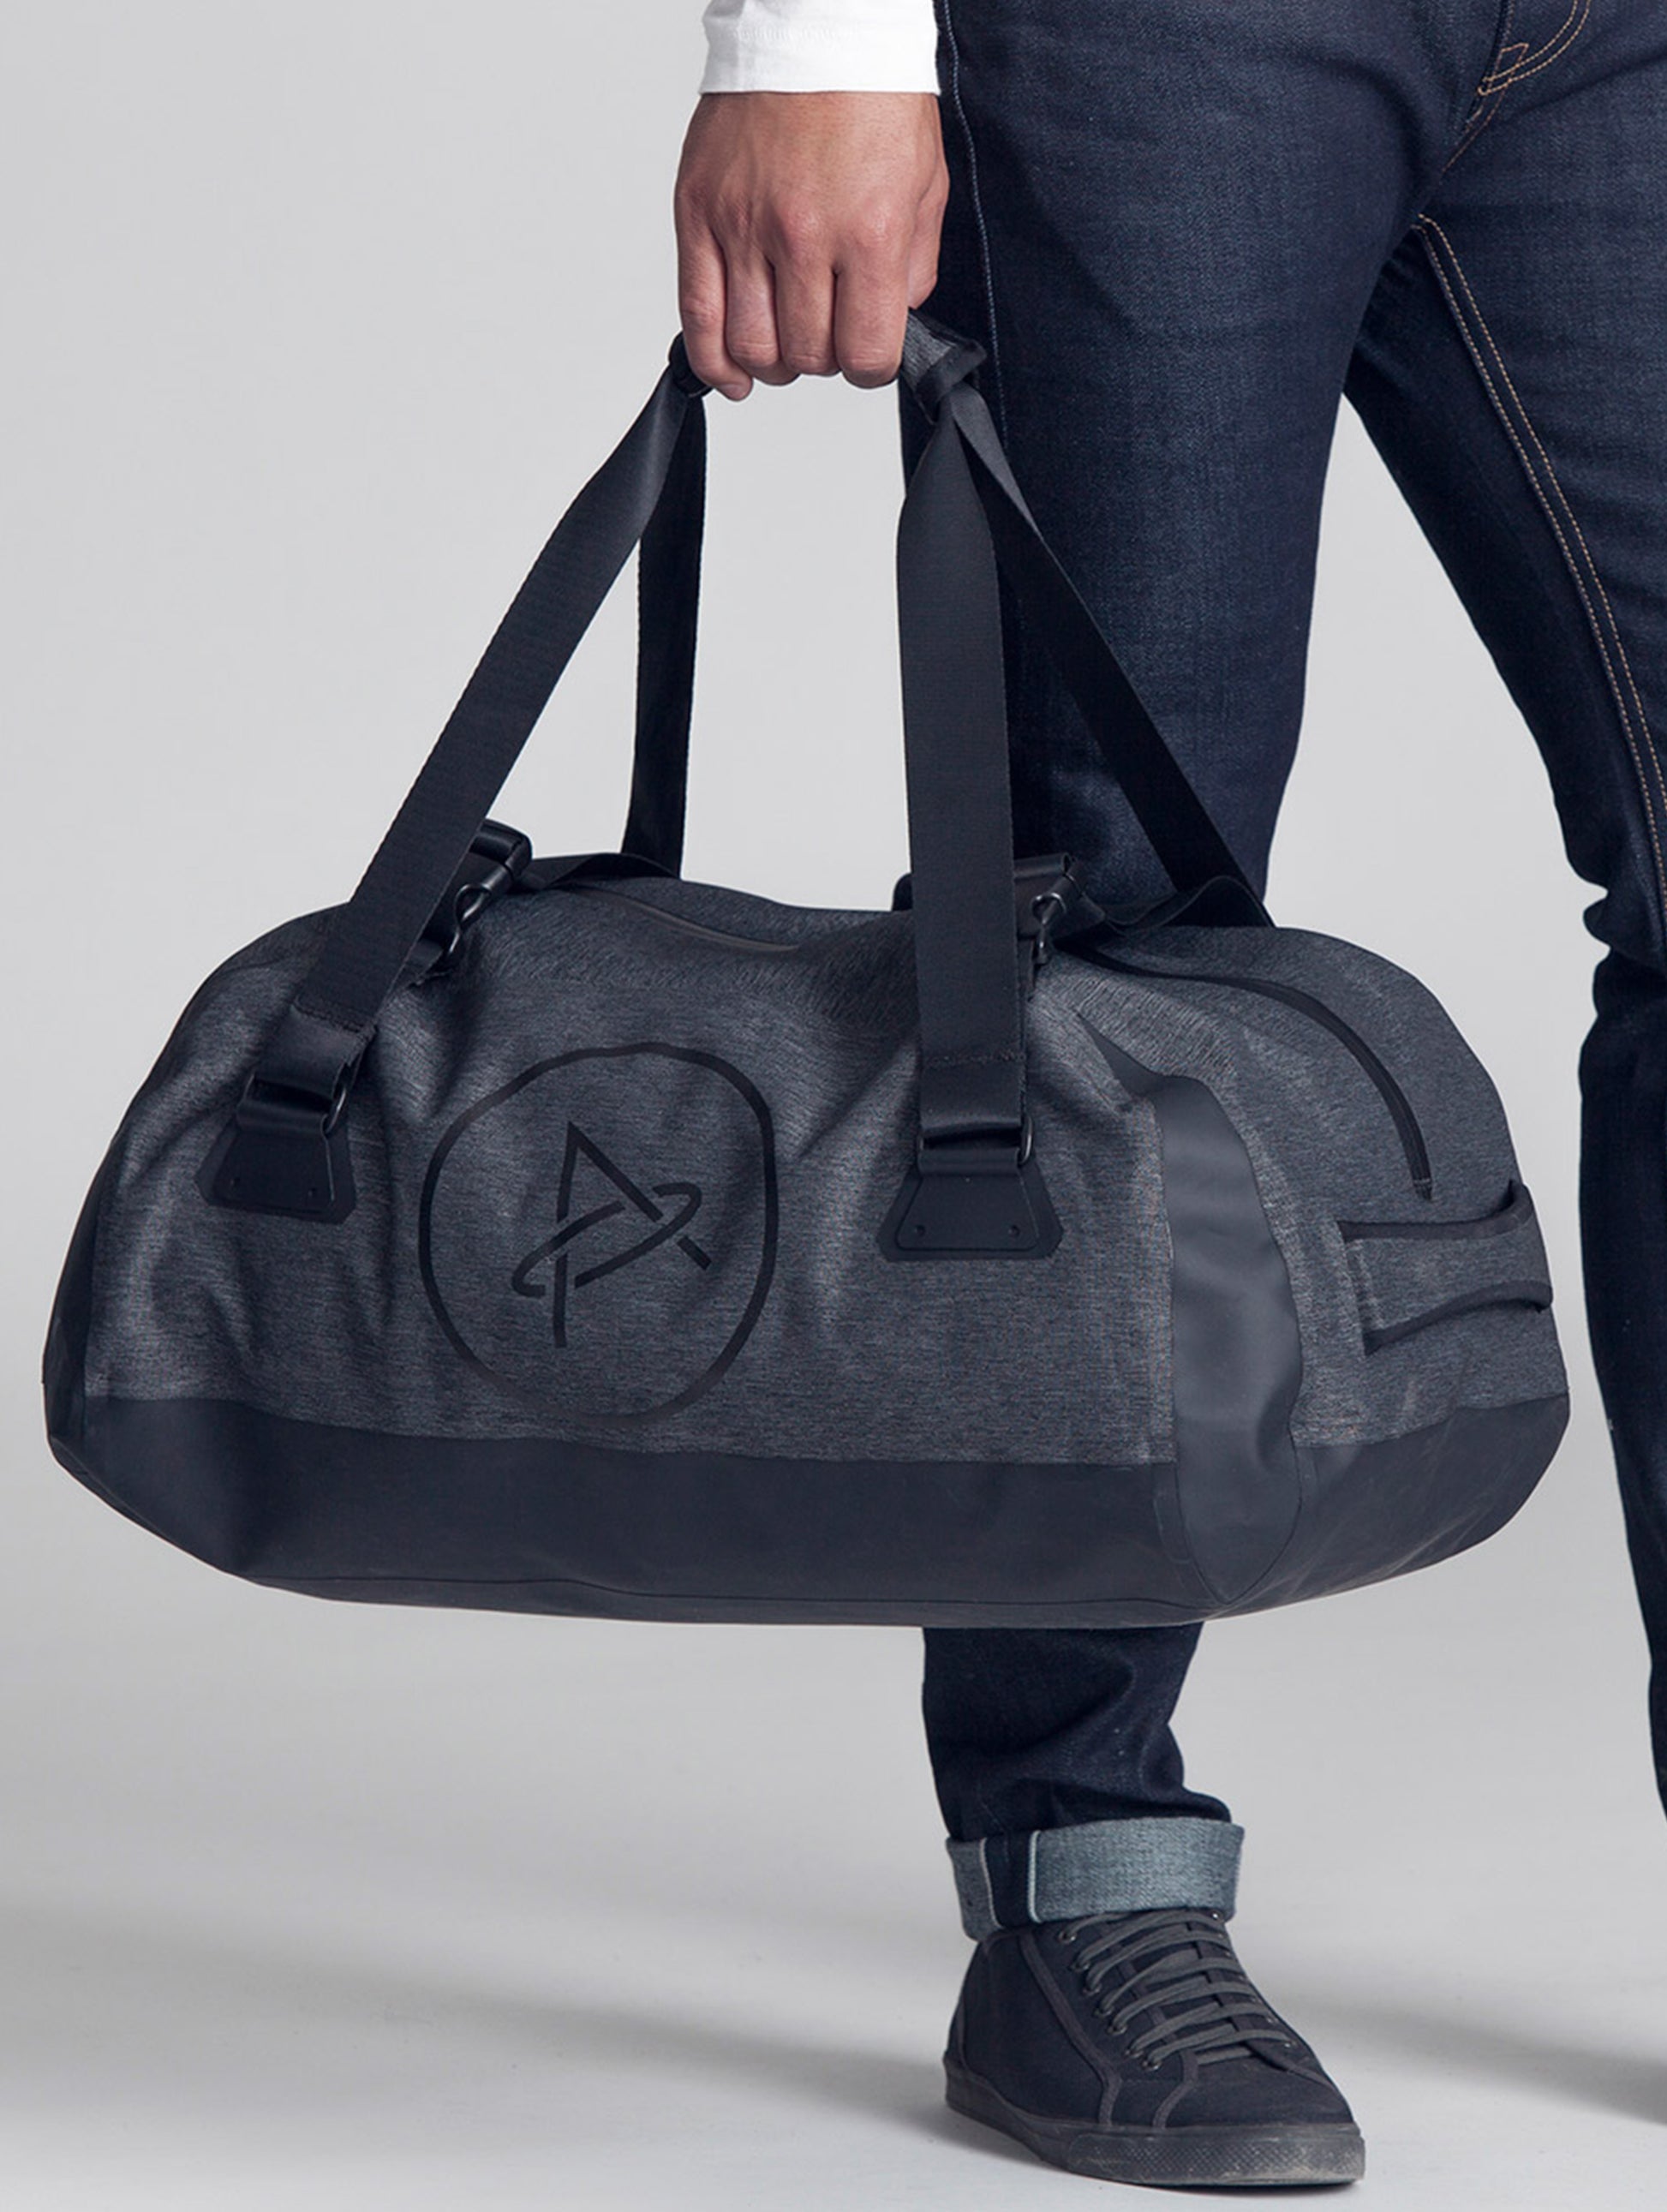 man holding grey duffle bag from AETHER Apparel